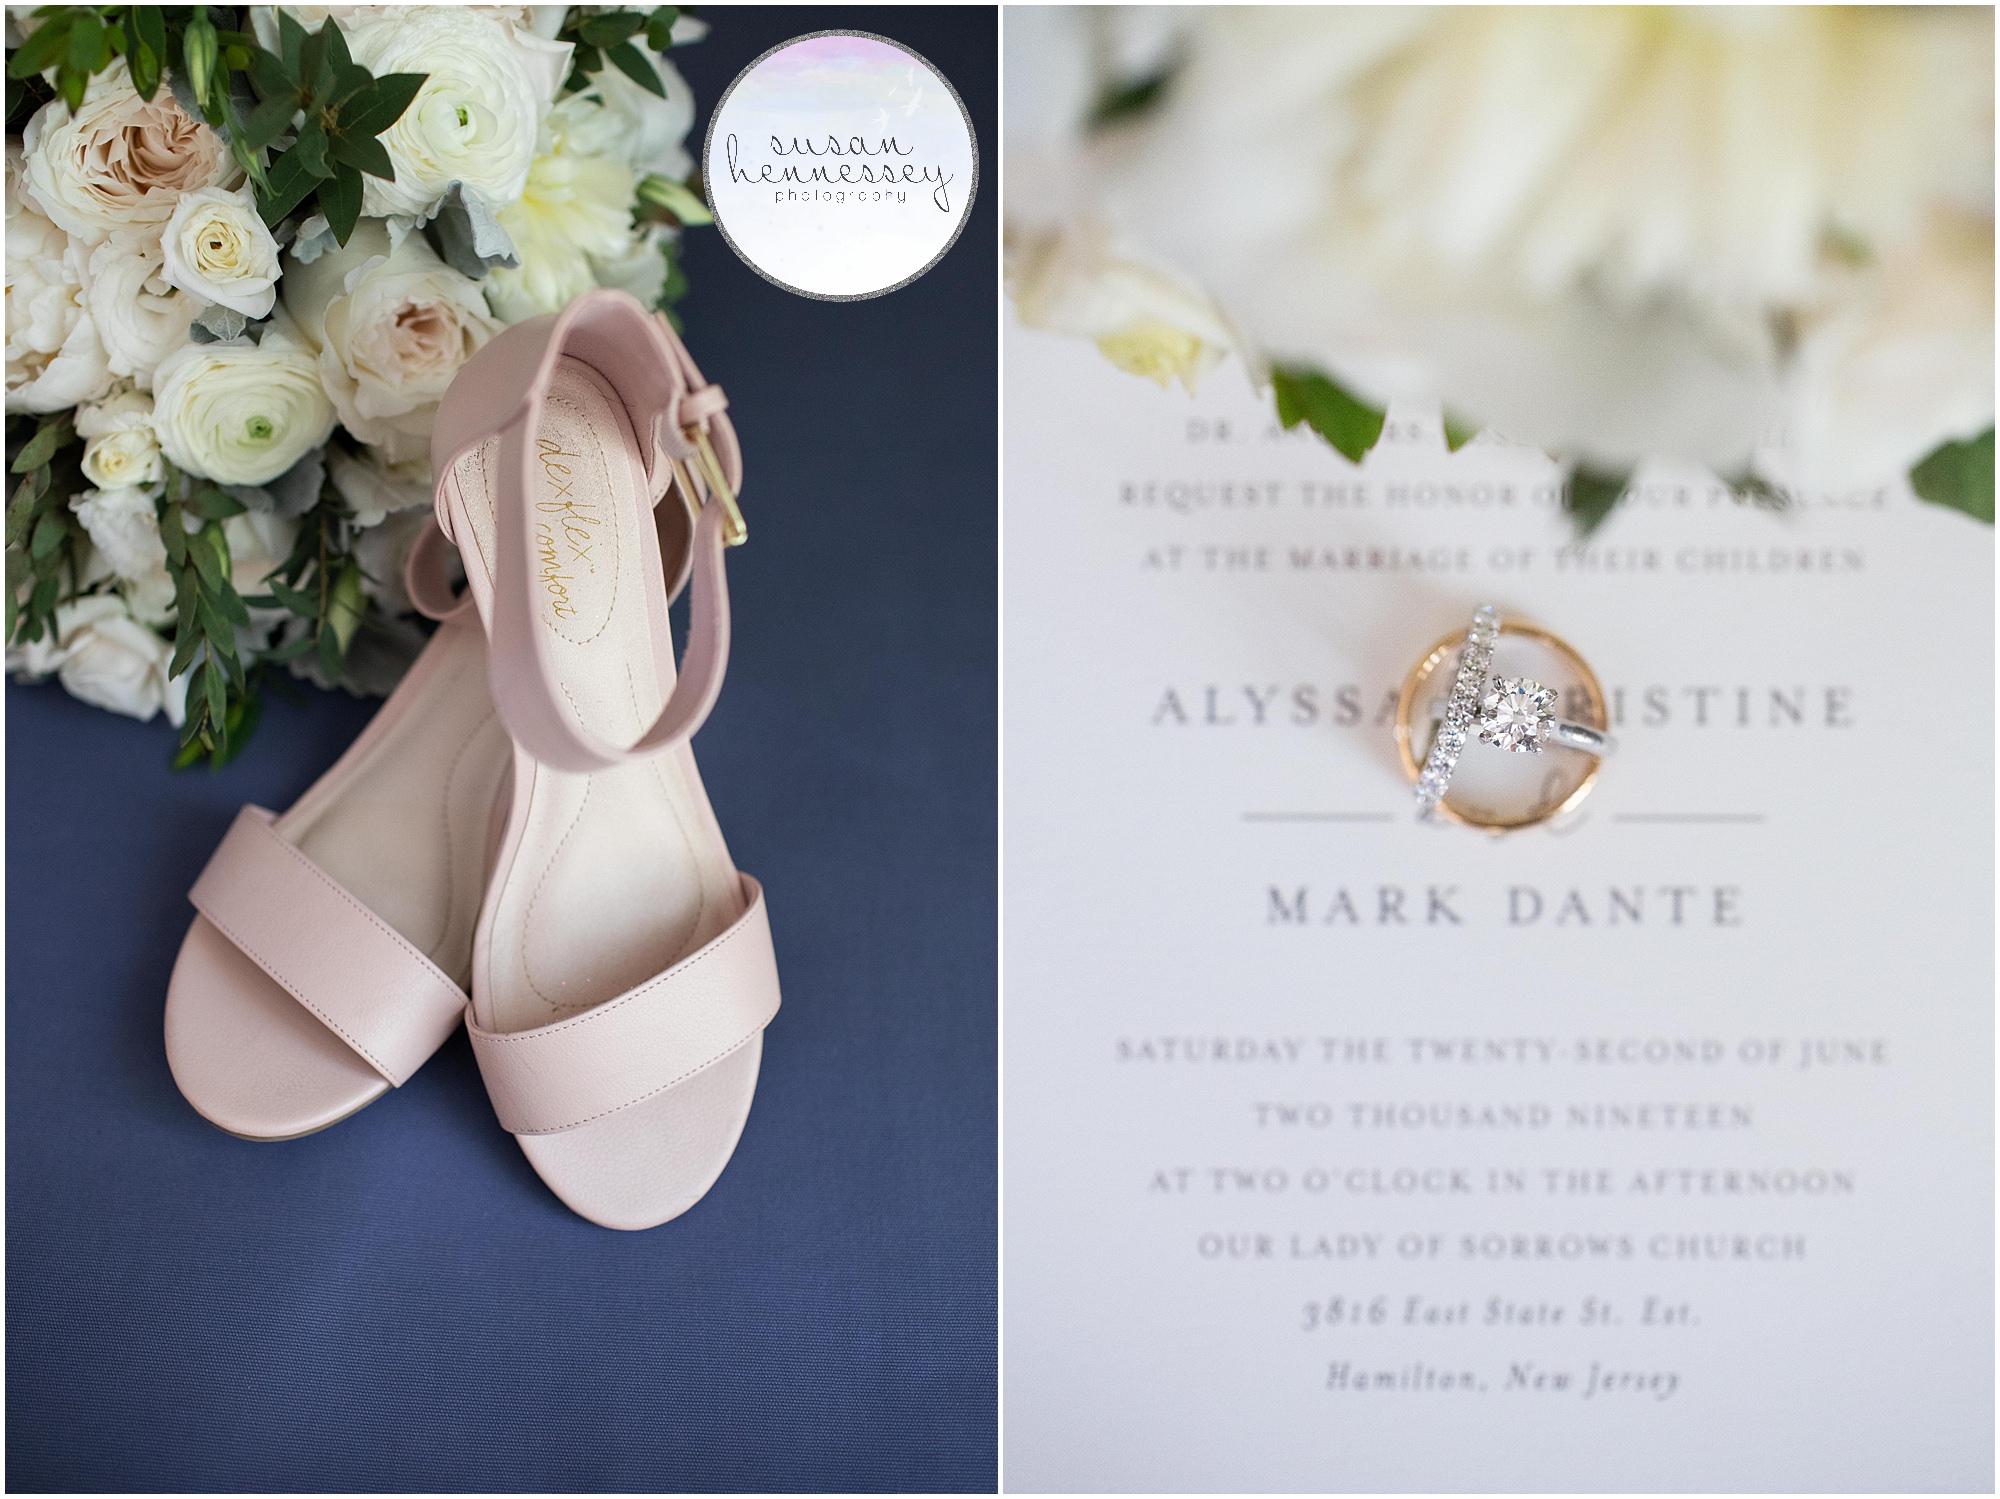 Bride's shoes, wedding invitation, wedding bands and engagement ring